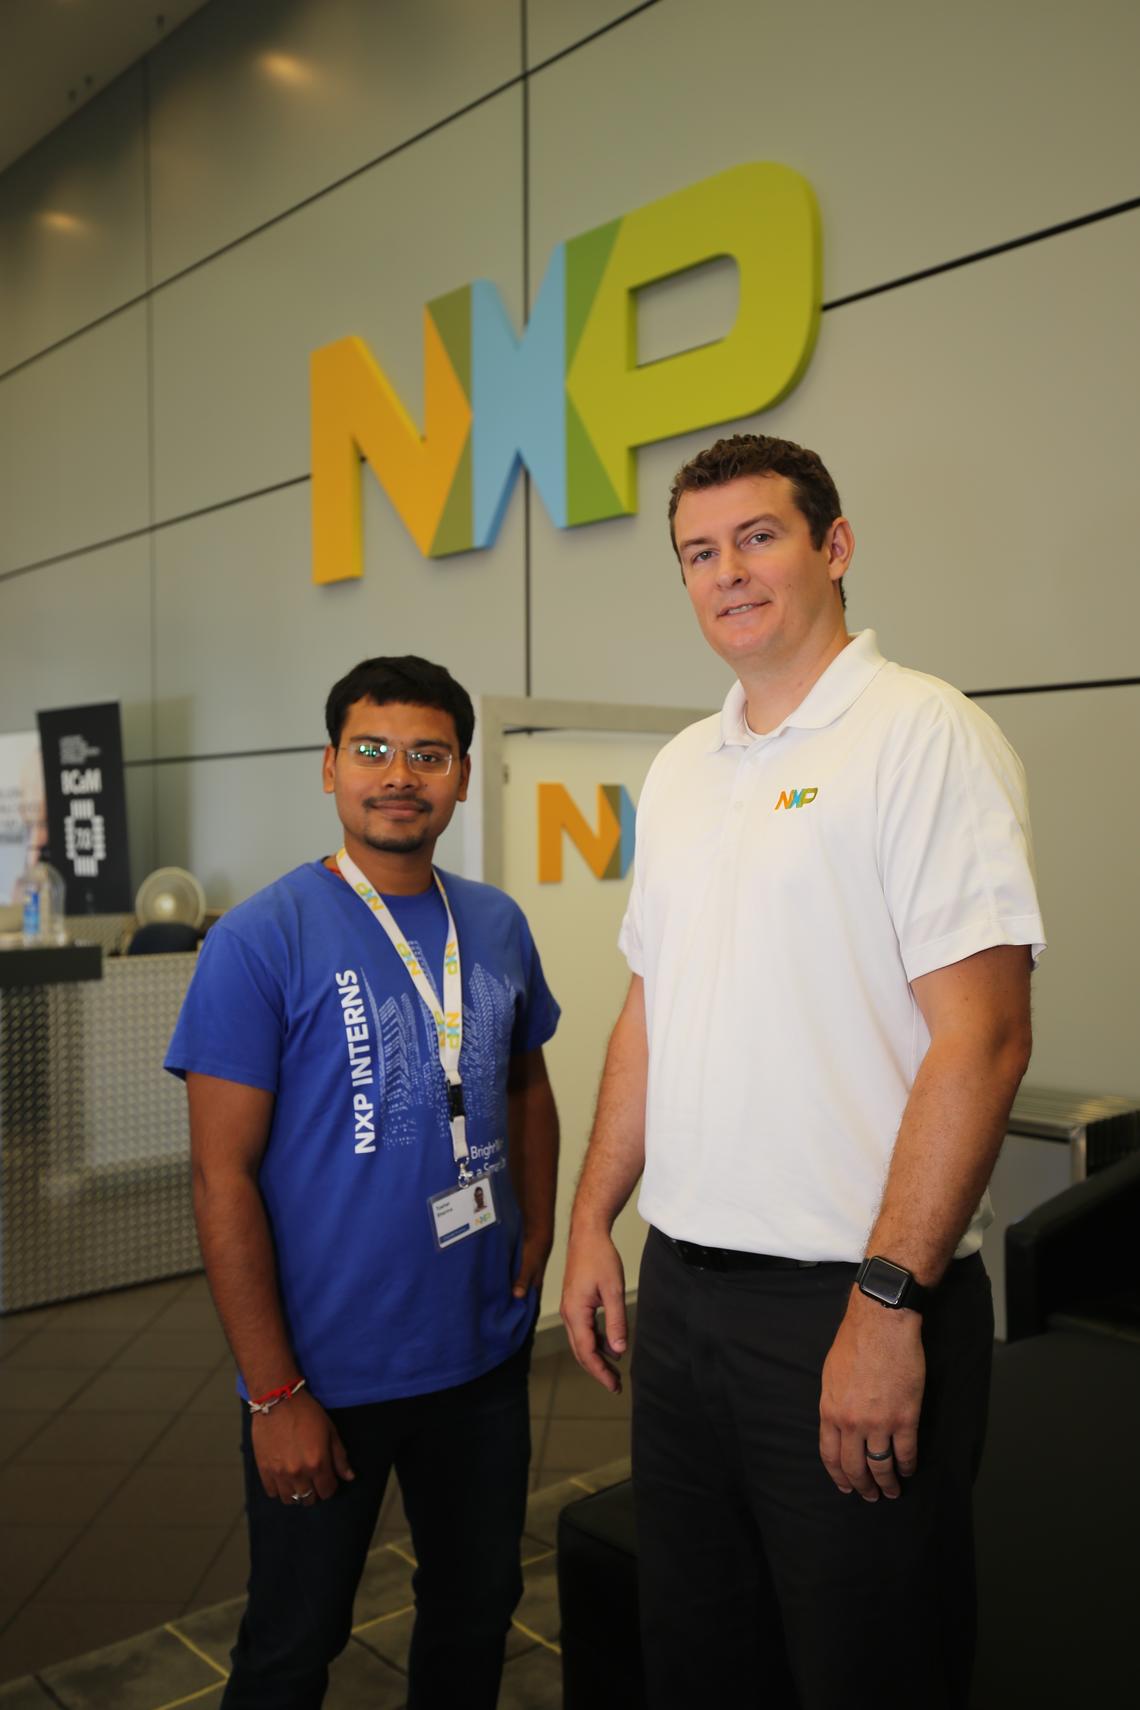 Tushar Sharma is participating in a Transformative Talent Internship at NXP Semiconductors to further develop his skills and understand the versatility of his graduate degree. His manager, Damon Holmes, advanced design technology manager at NXP Semiconductors, is a University of Calgary alumnus.